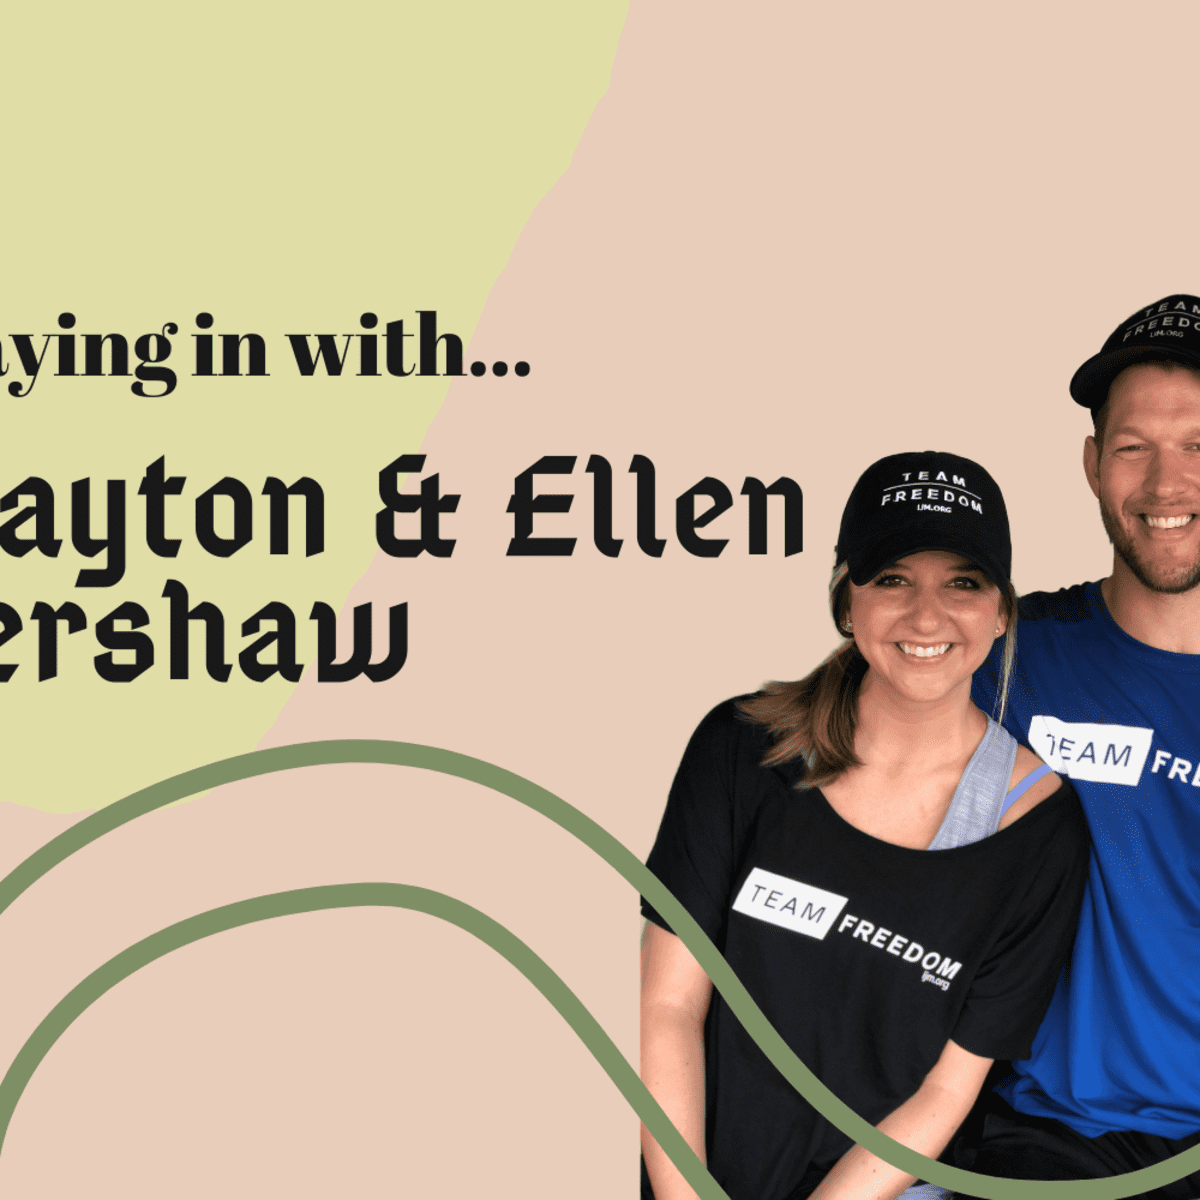 Clayton Kershaw and Ellen Kershaw Are Raising Money to Fight